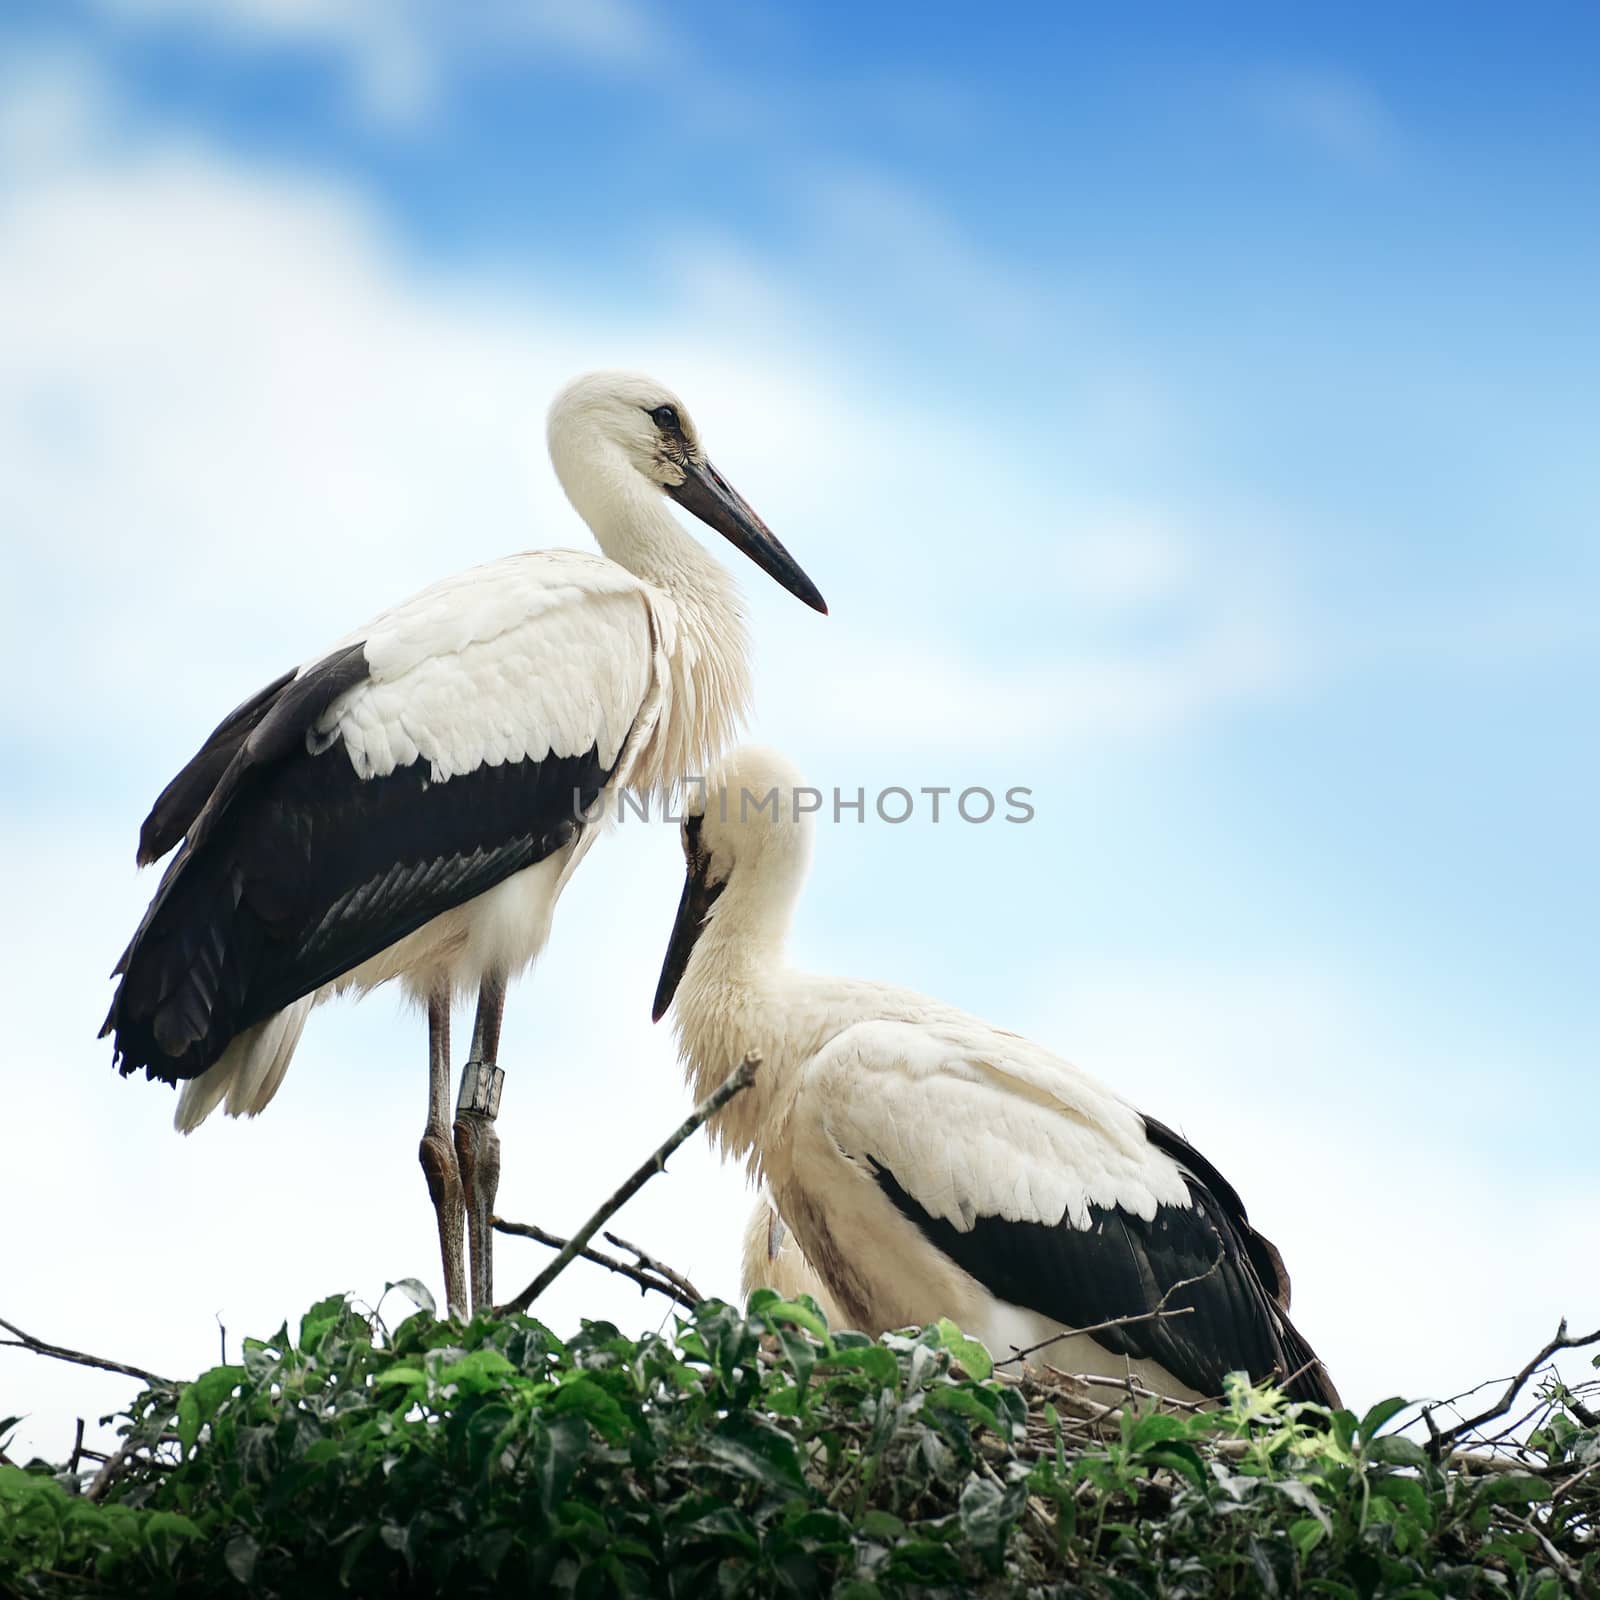 Storks in the nest by galina_velusceac